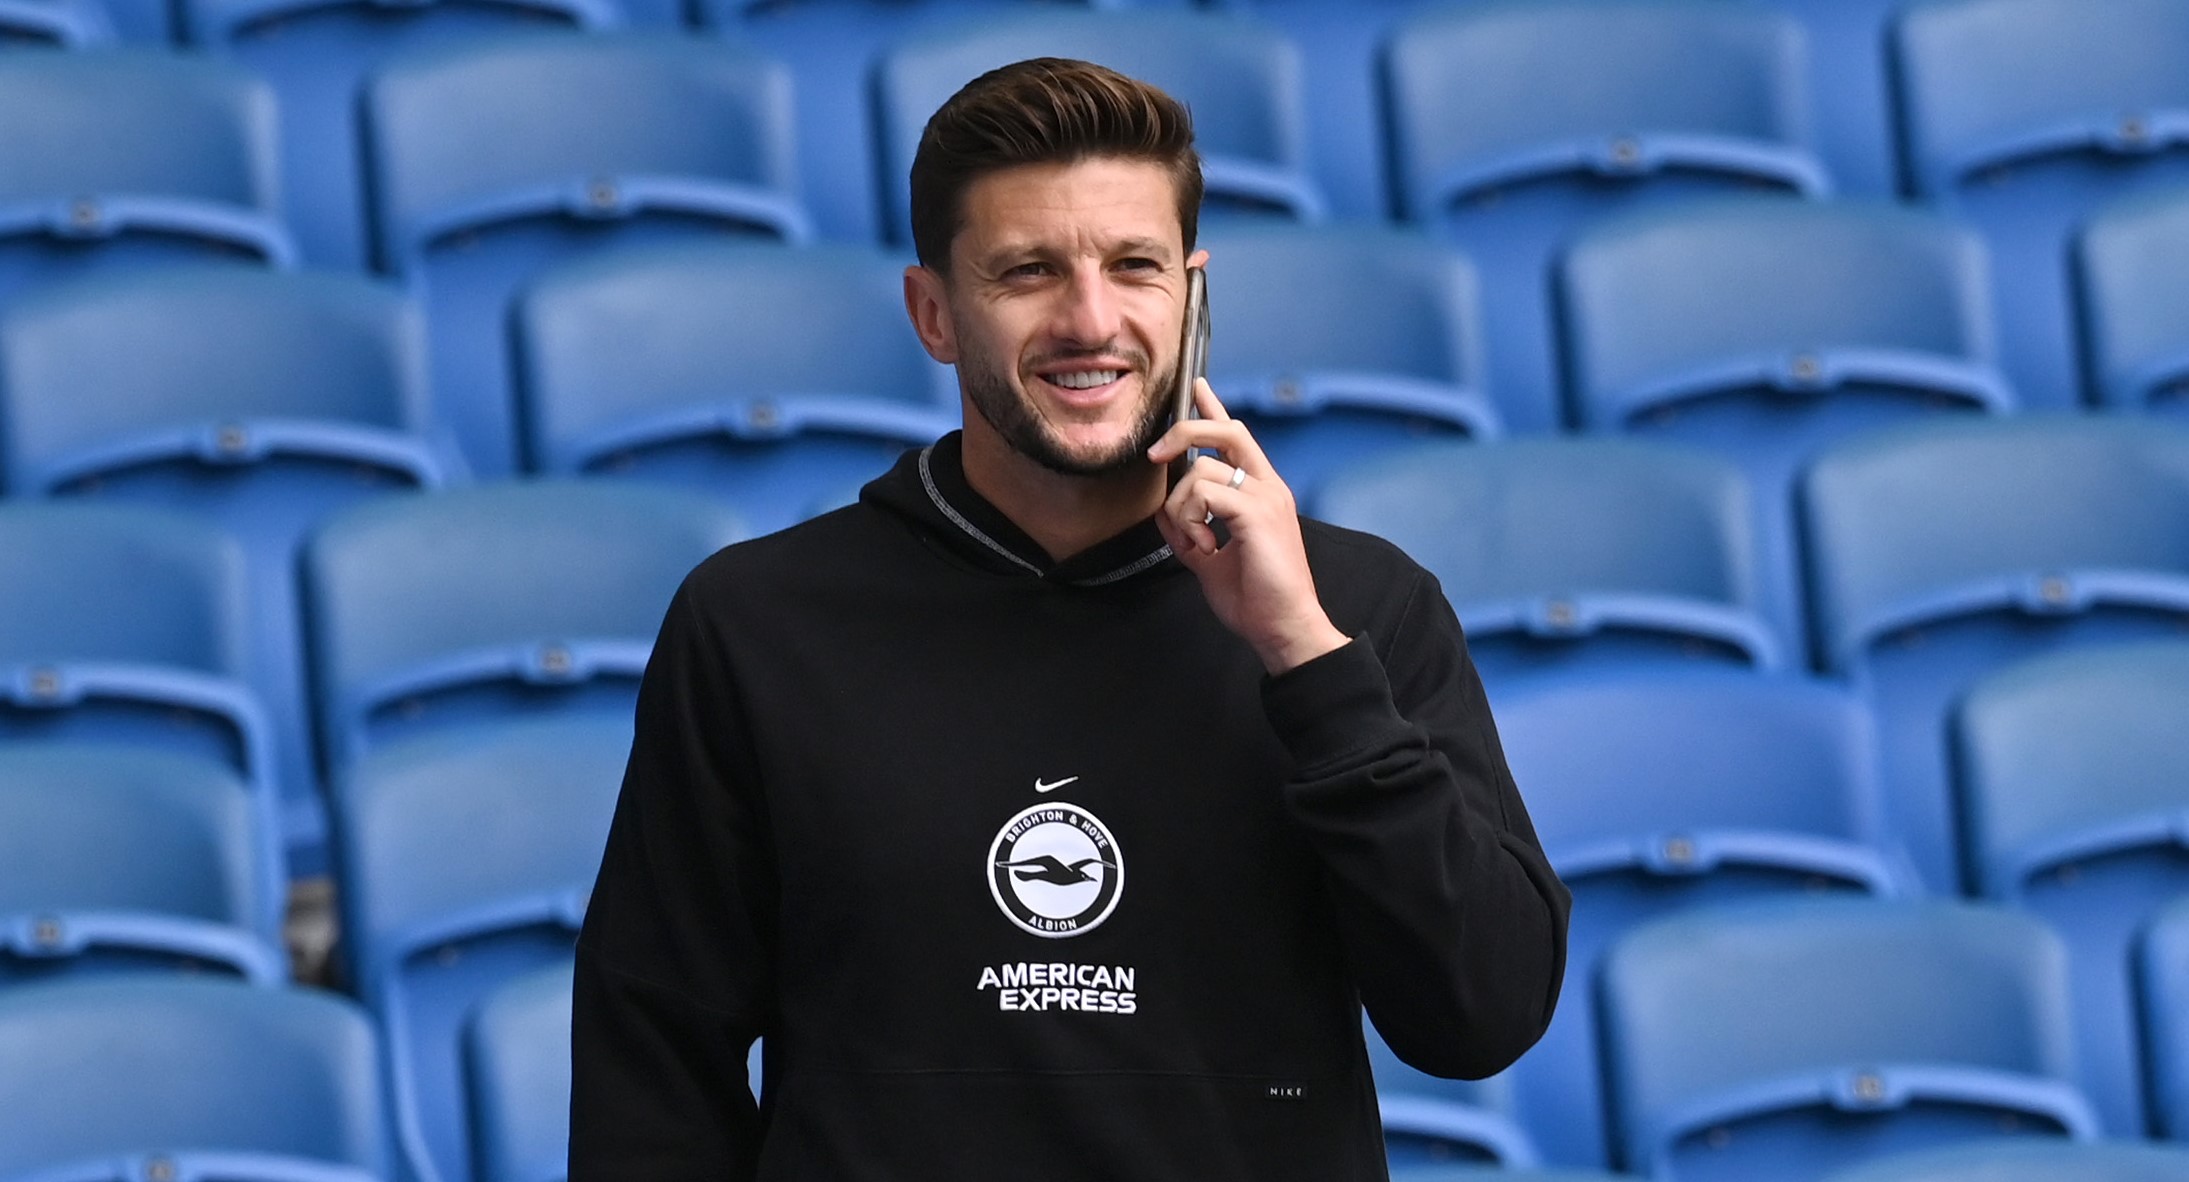 Adam Lallana says Graham Potter should be considered for Brighton role